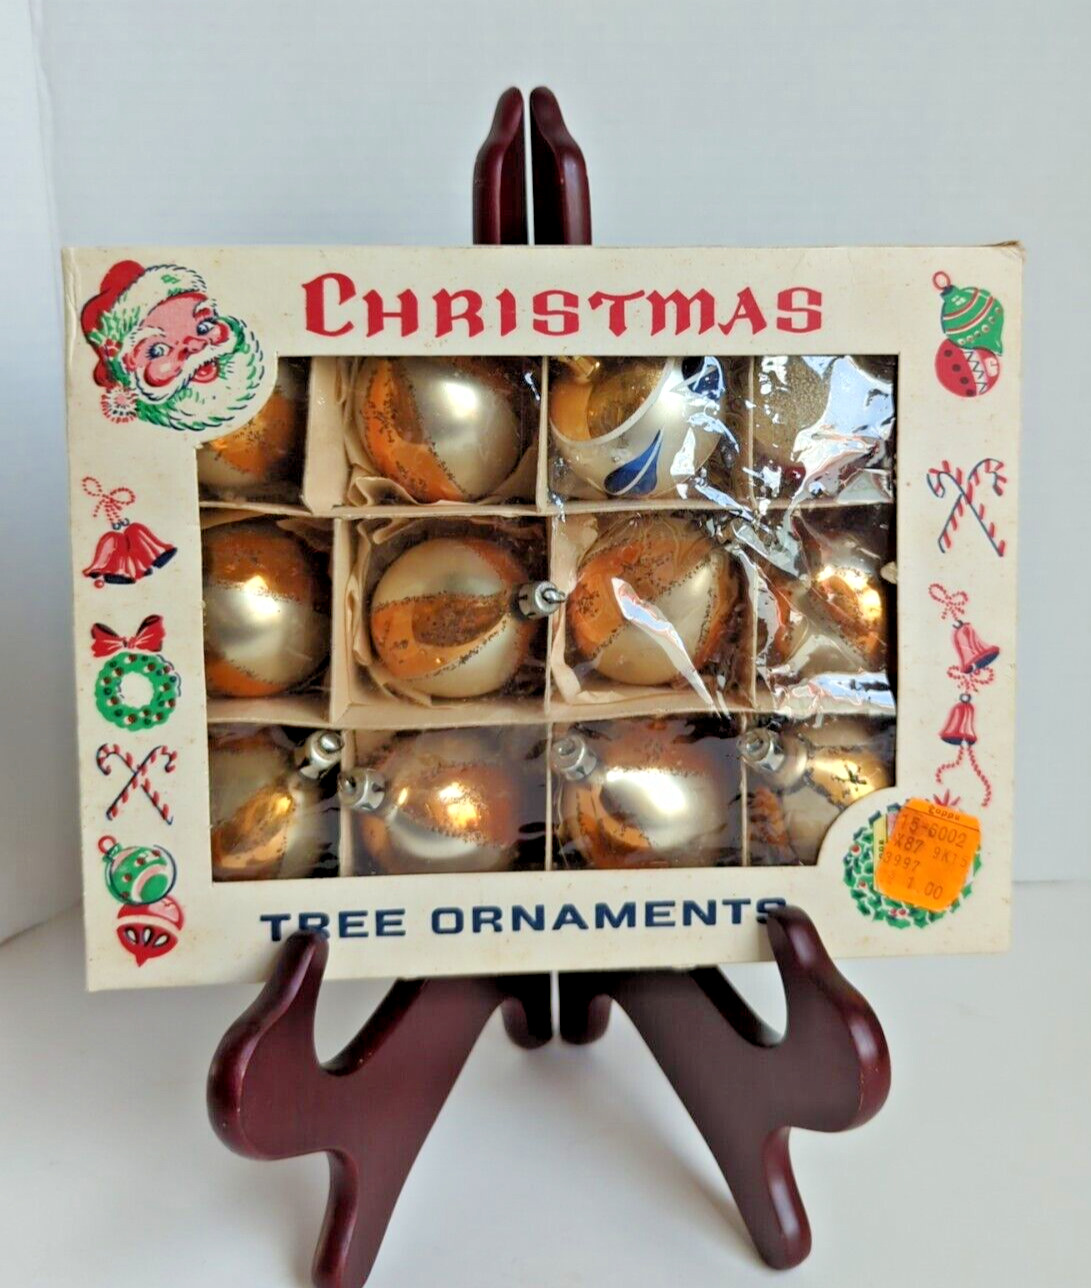 12 VINTAGE CHRISTMAS TREE ORNAMENTS POLAND TEAR DROP GLITTER HAND PAINTED Gold